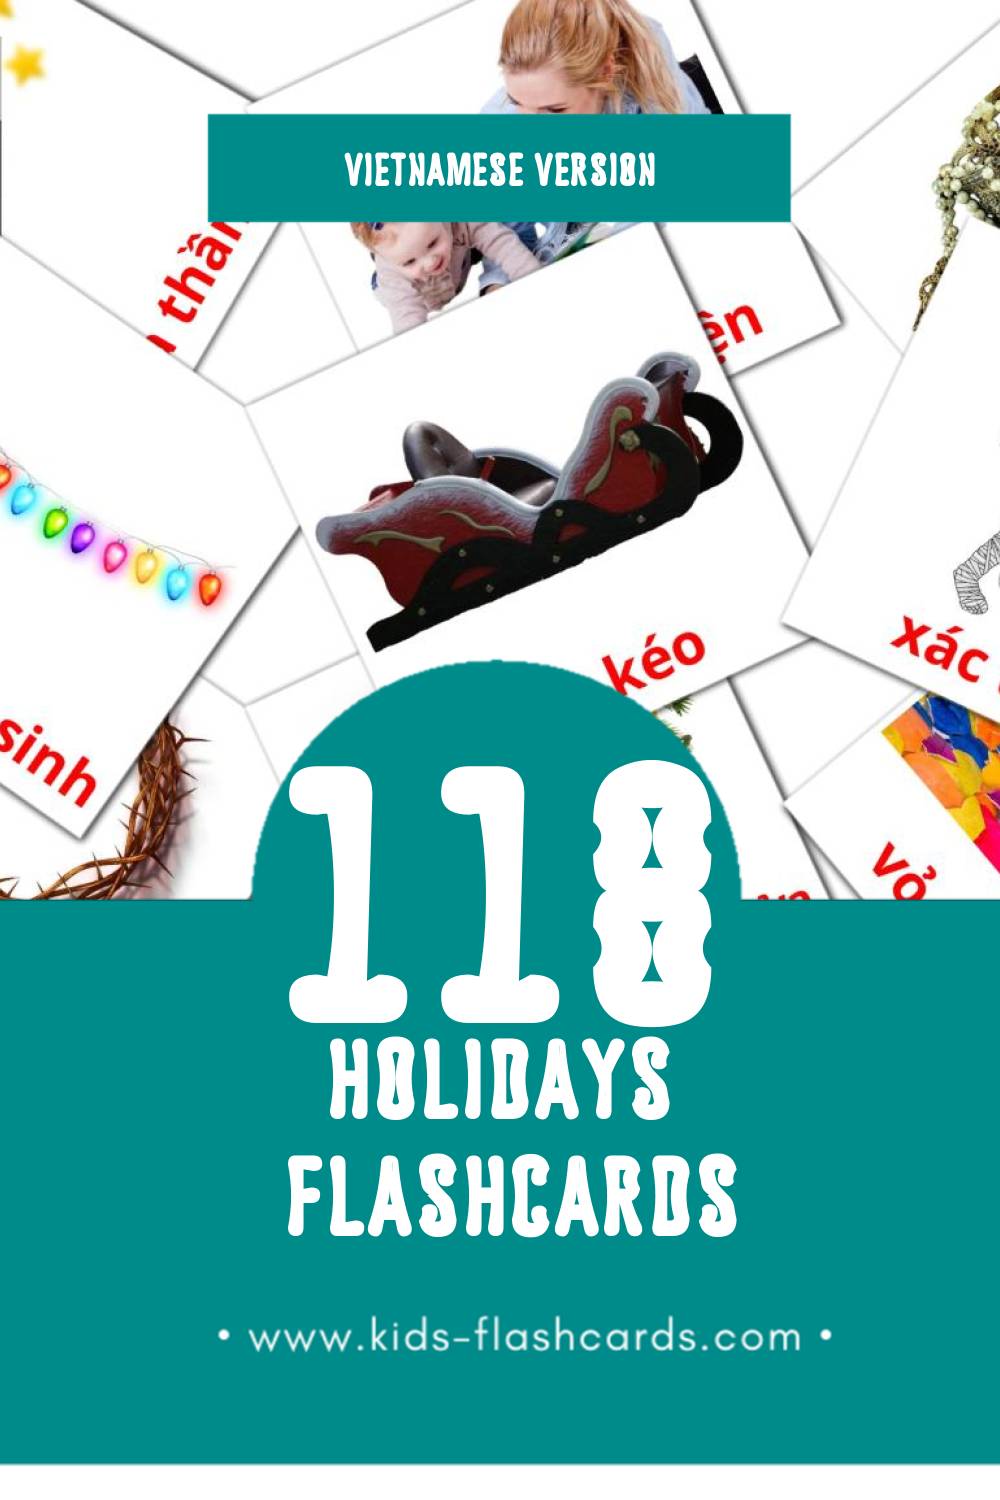 Visual Ngày nghỉ Flashcards for Toddlers (28 cards in Vietnamese)